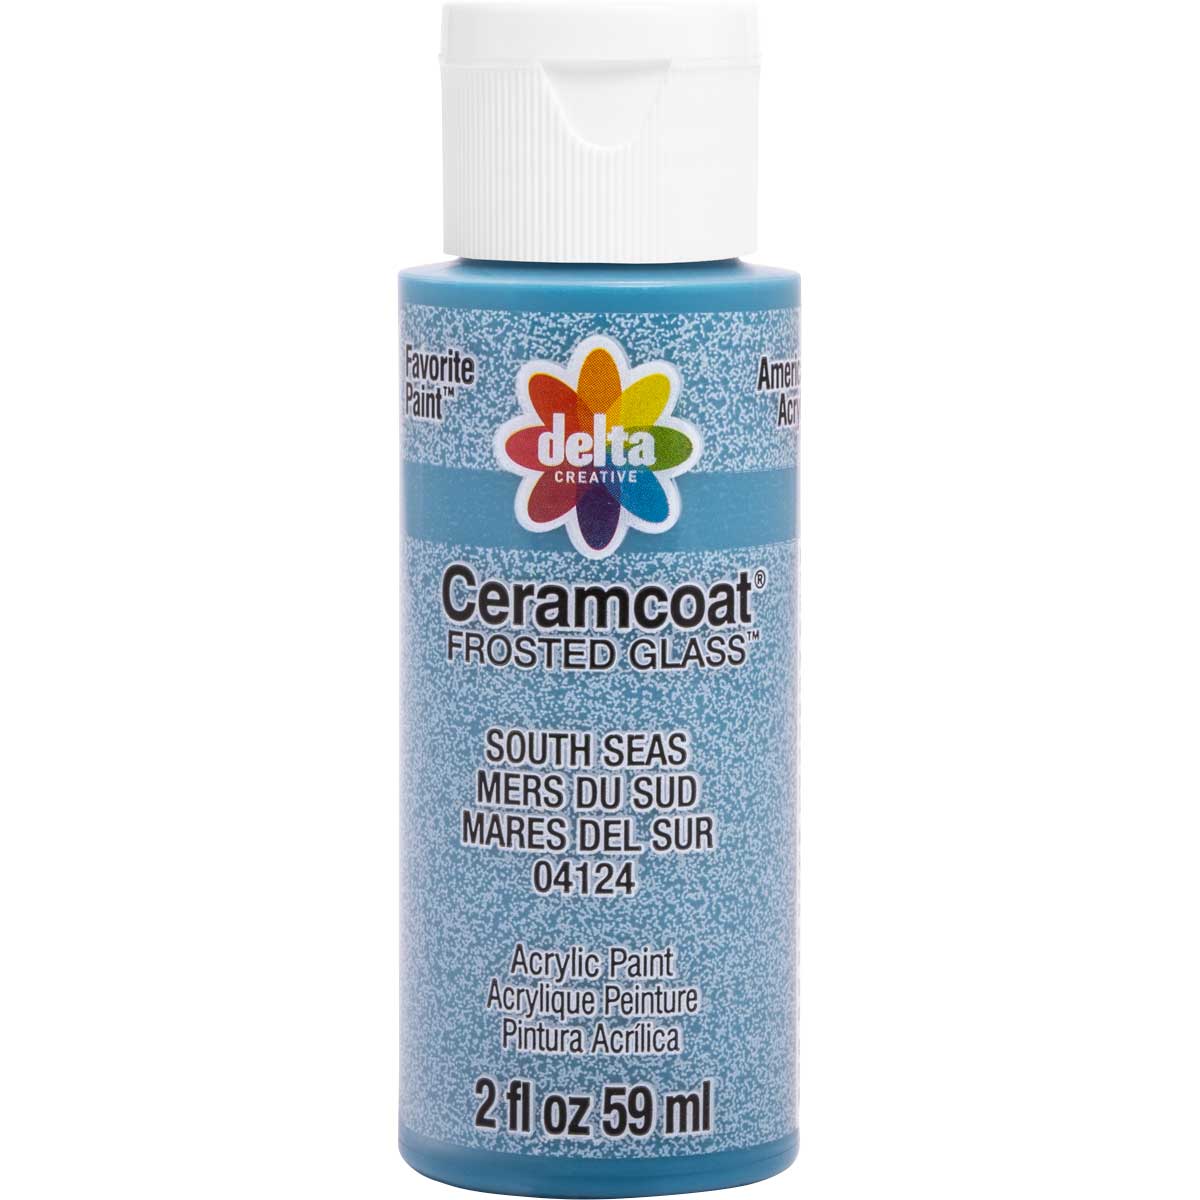 Delta Ceramcoat ® Frosted Glass Paint - South Seas, 2 oz. - 04124